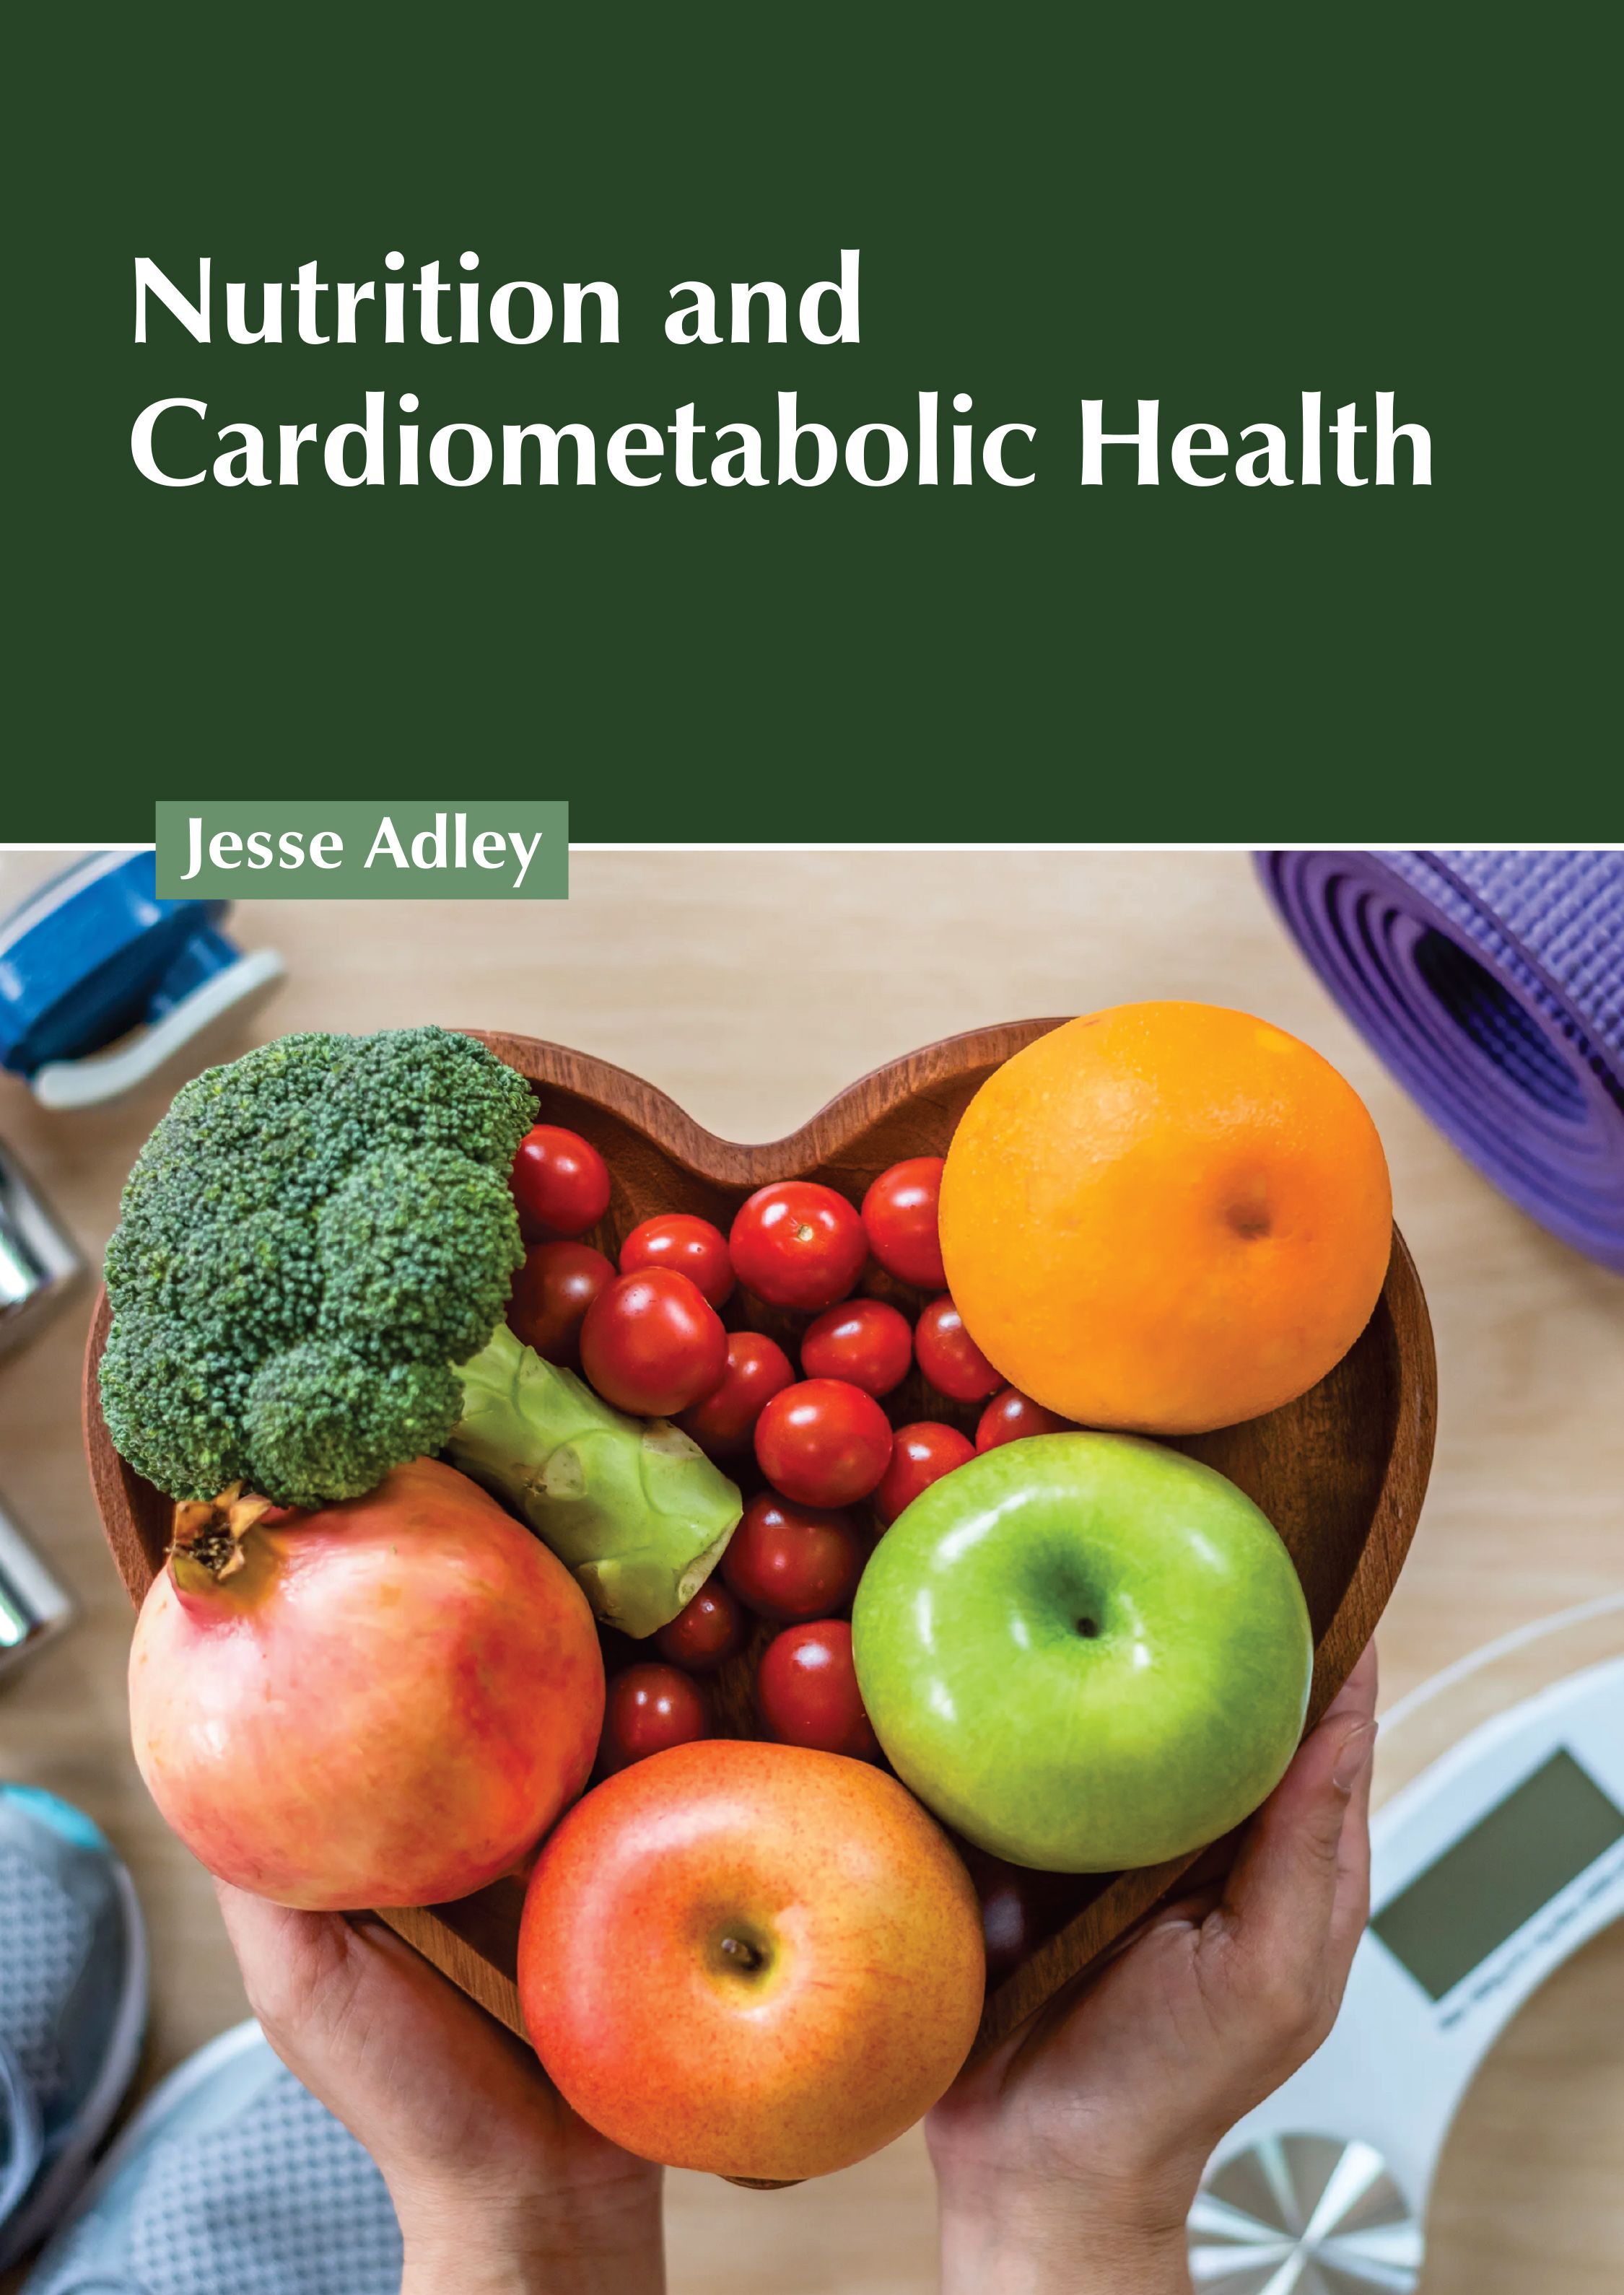 NUTRITION AND CARDIOMETABOLIC HEALTH